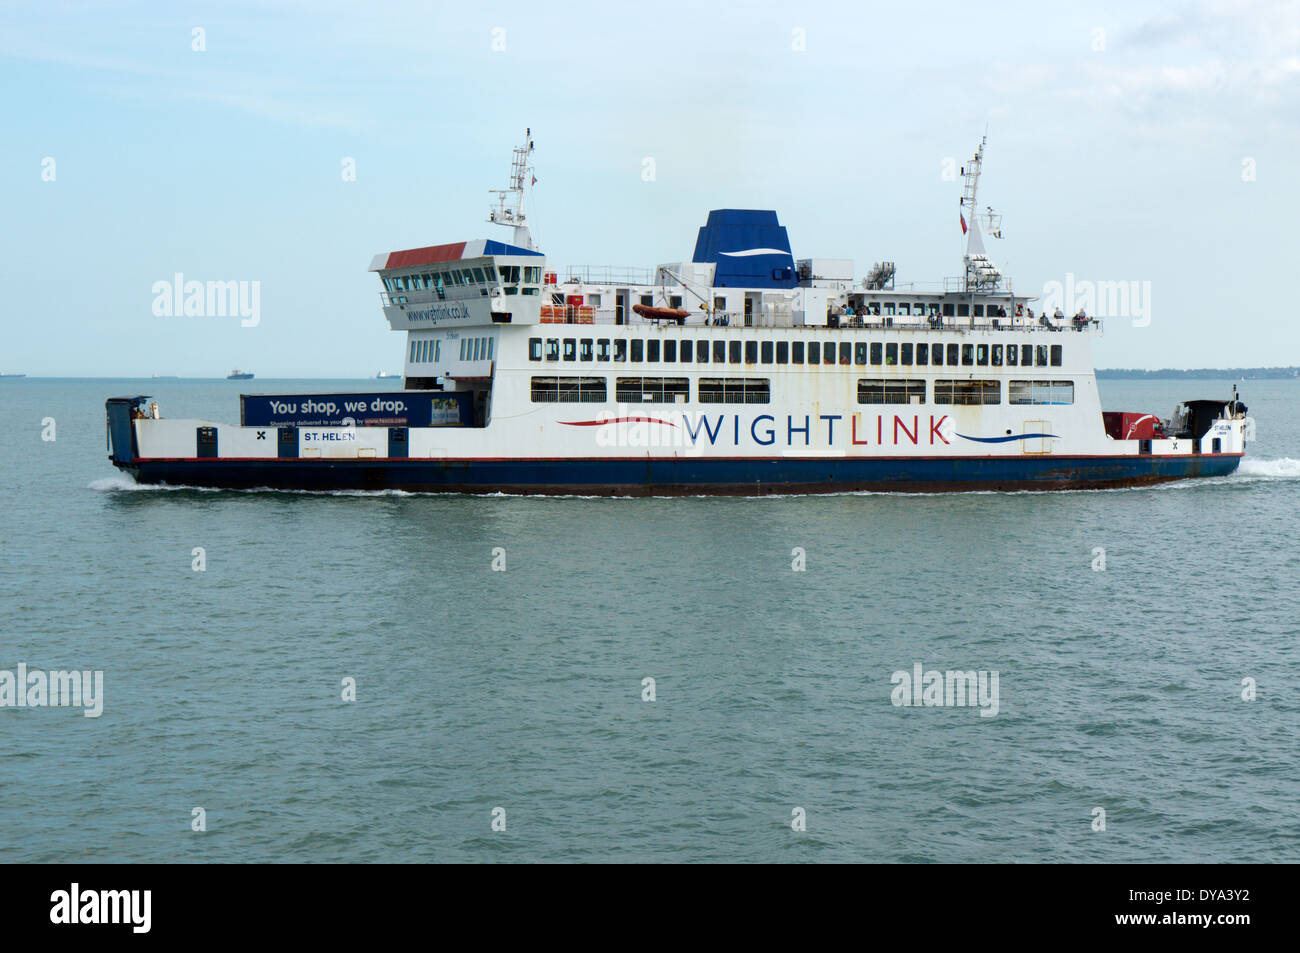 The Wightlink car ferry between Portsmouth and the Isle of Wight. Stock Photo